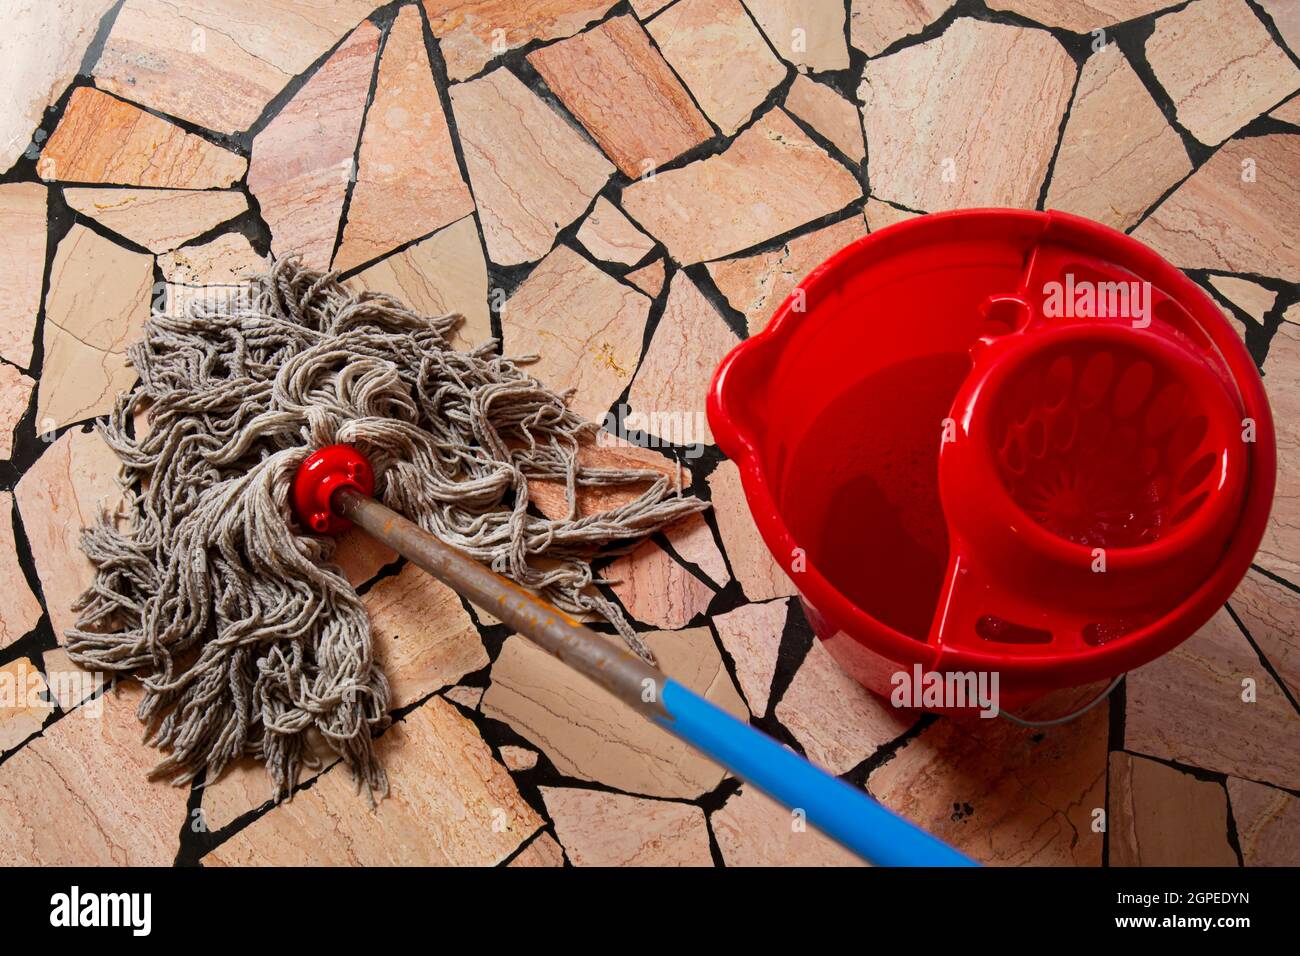 https://c8.alamy.com/comp/2GPEDYN/house-cleaning-concept-cleaning-floors-in-the-house-red-bucket-and-mop-2GPEDYN.jpg